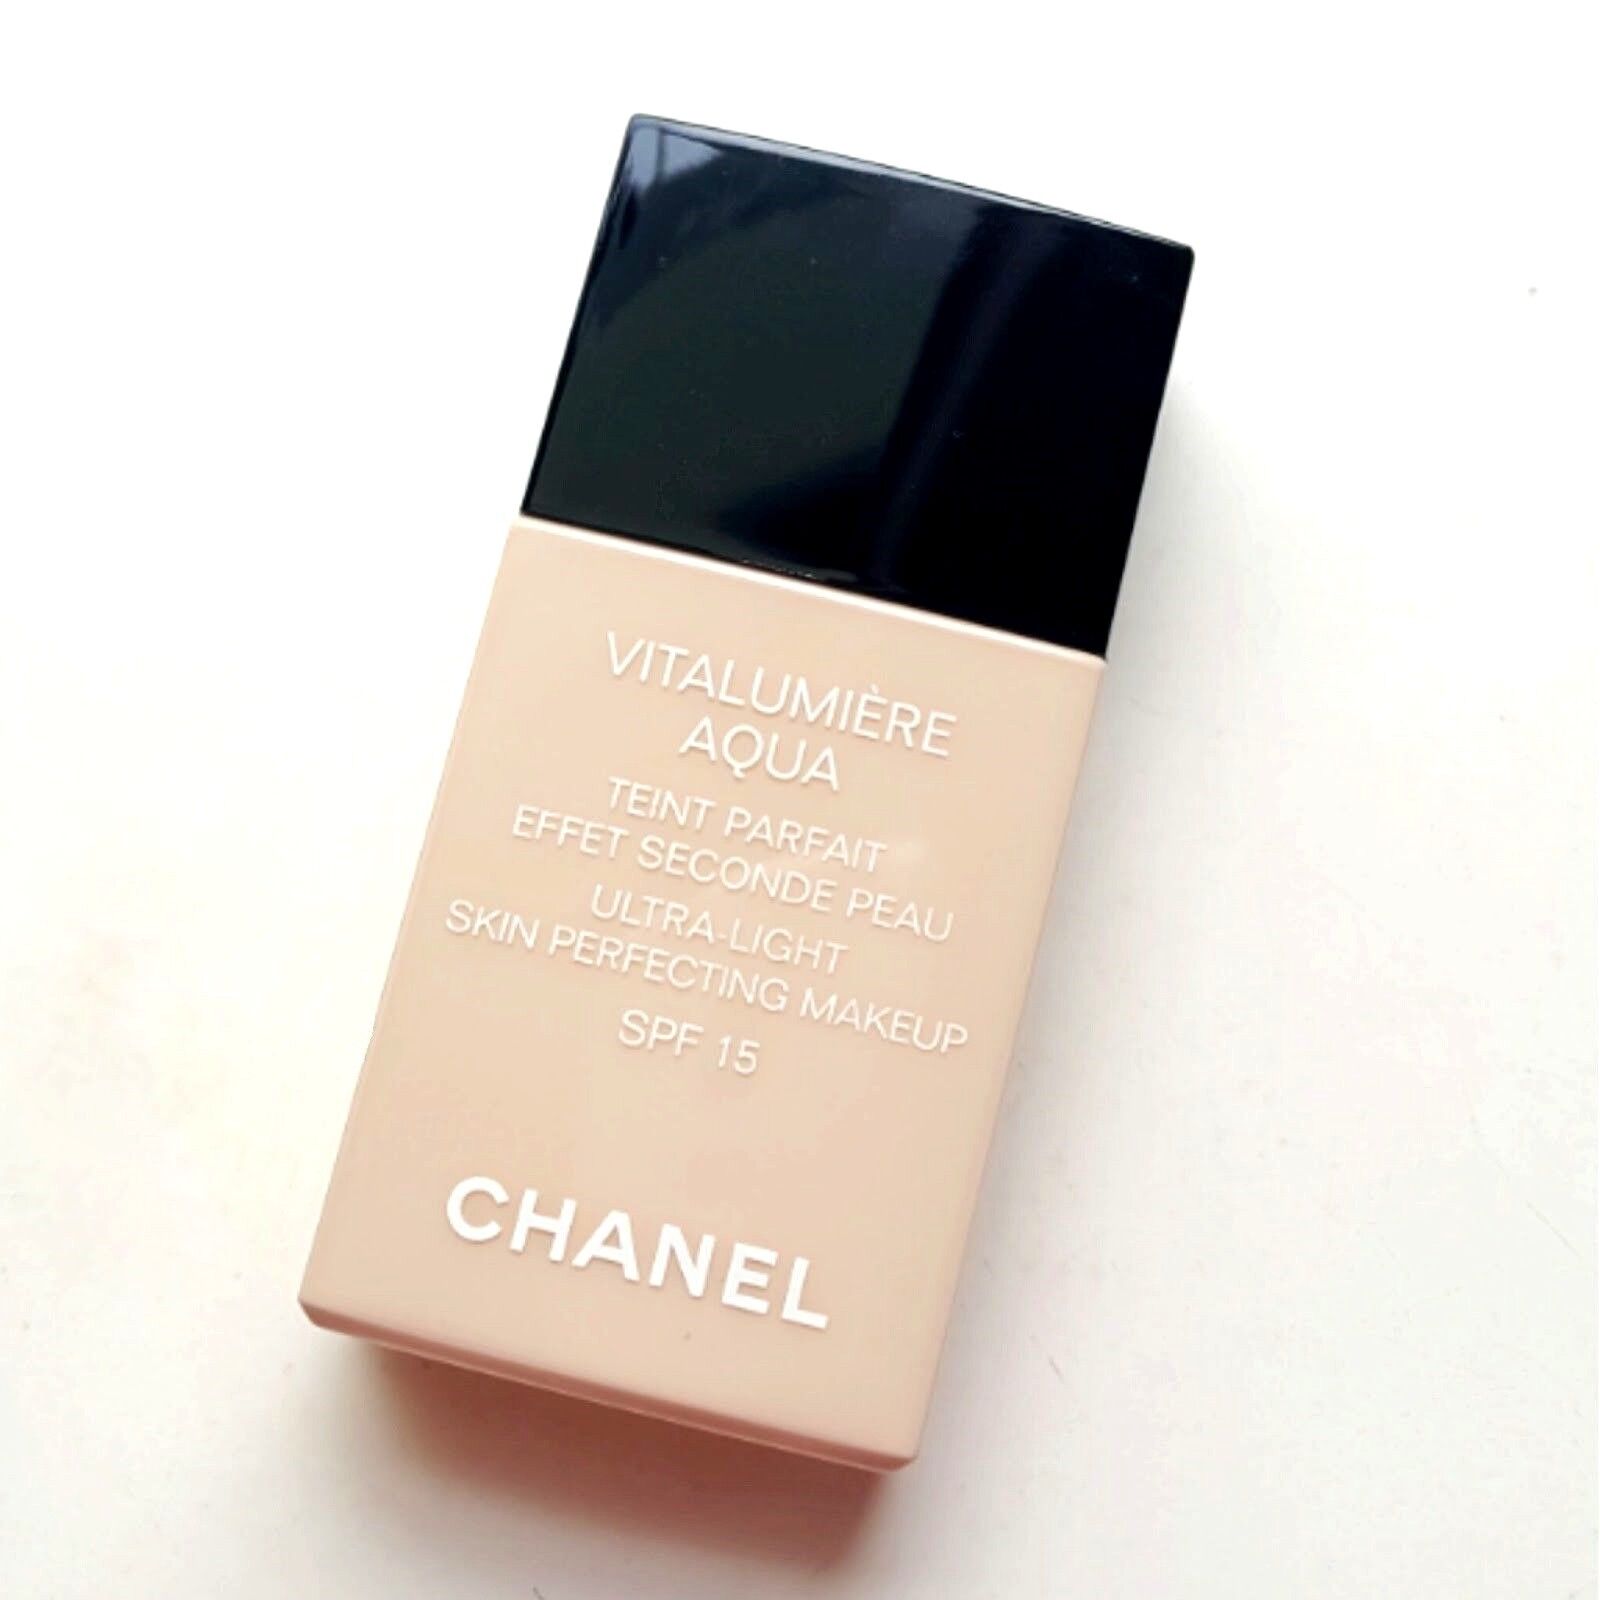 Foundation Chanel at great prices